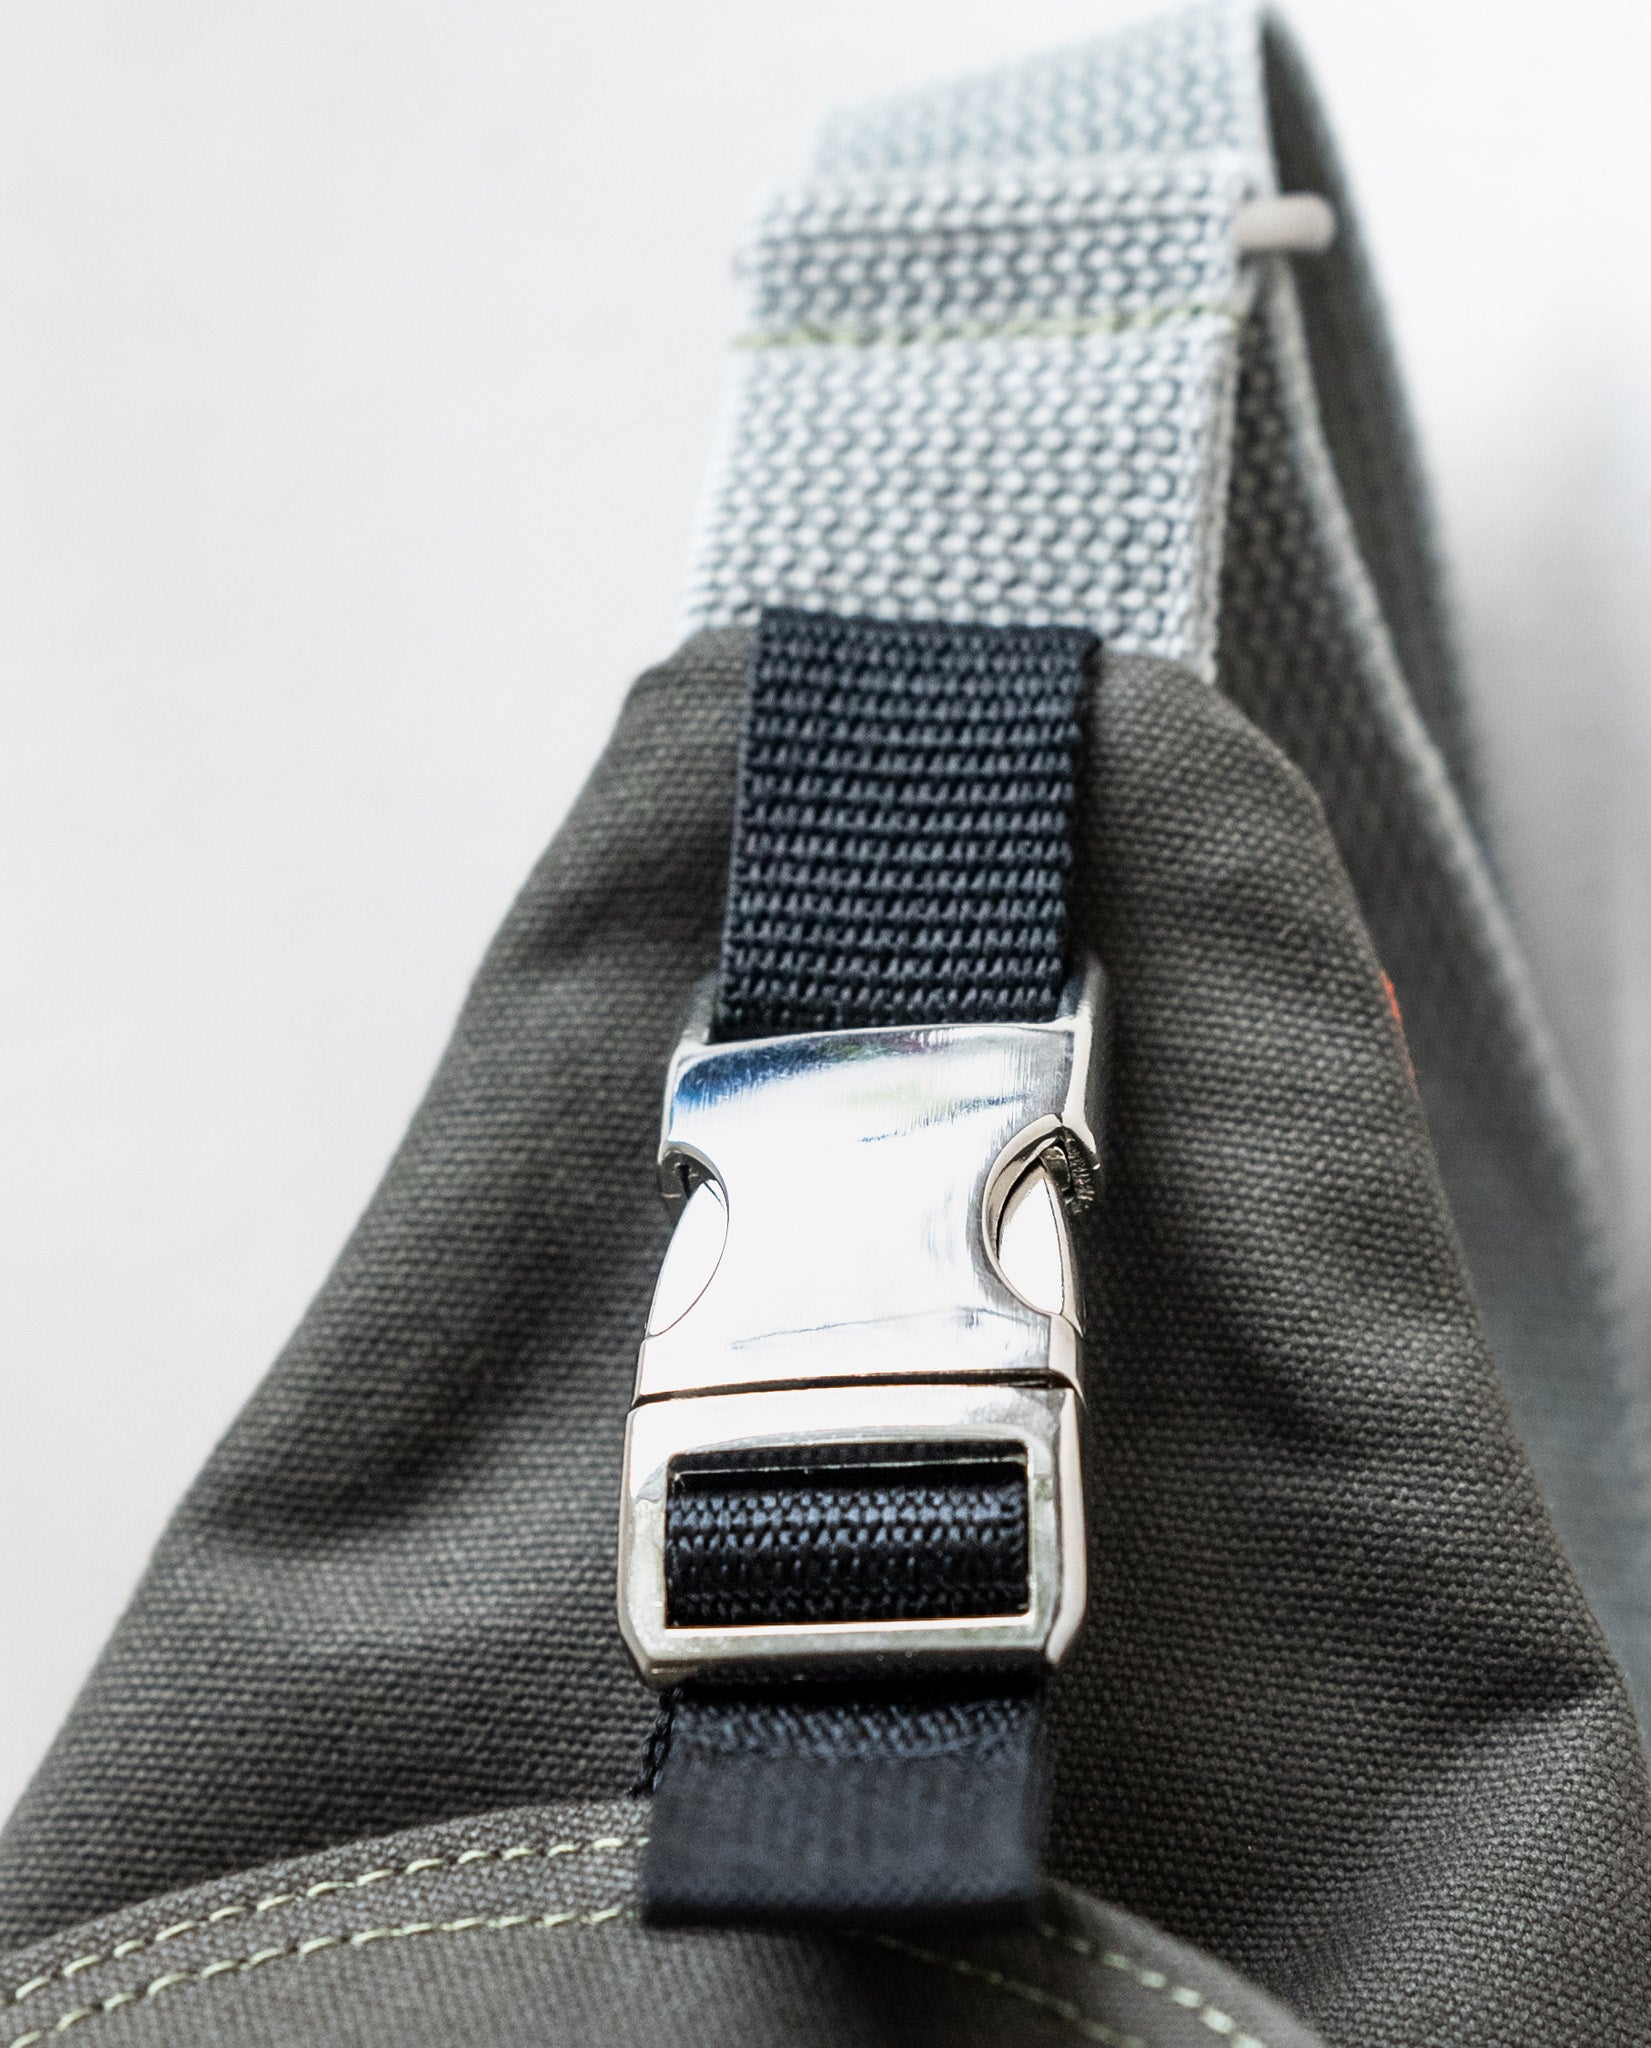 An aluminum side-squeeze buckle secures the front flap of Dock 5’s spacious, hand-sewn Kingfisher Canvas Sling Bag